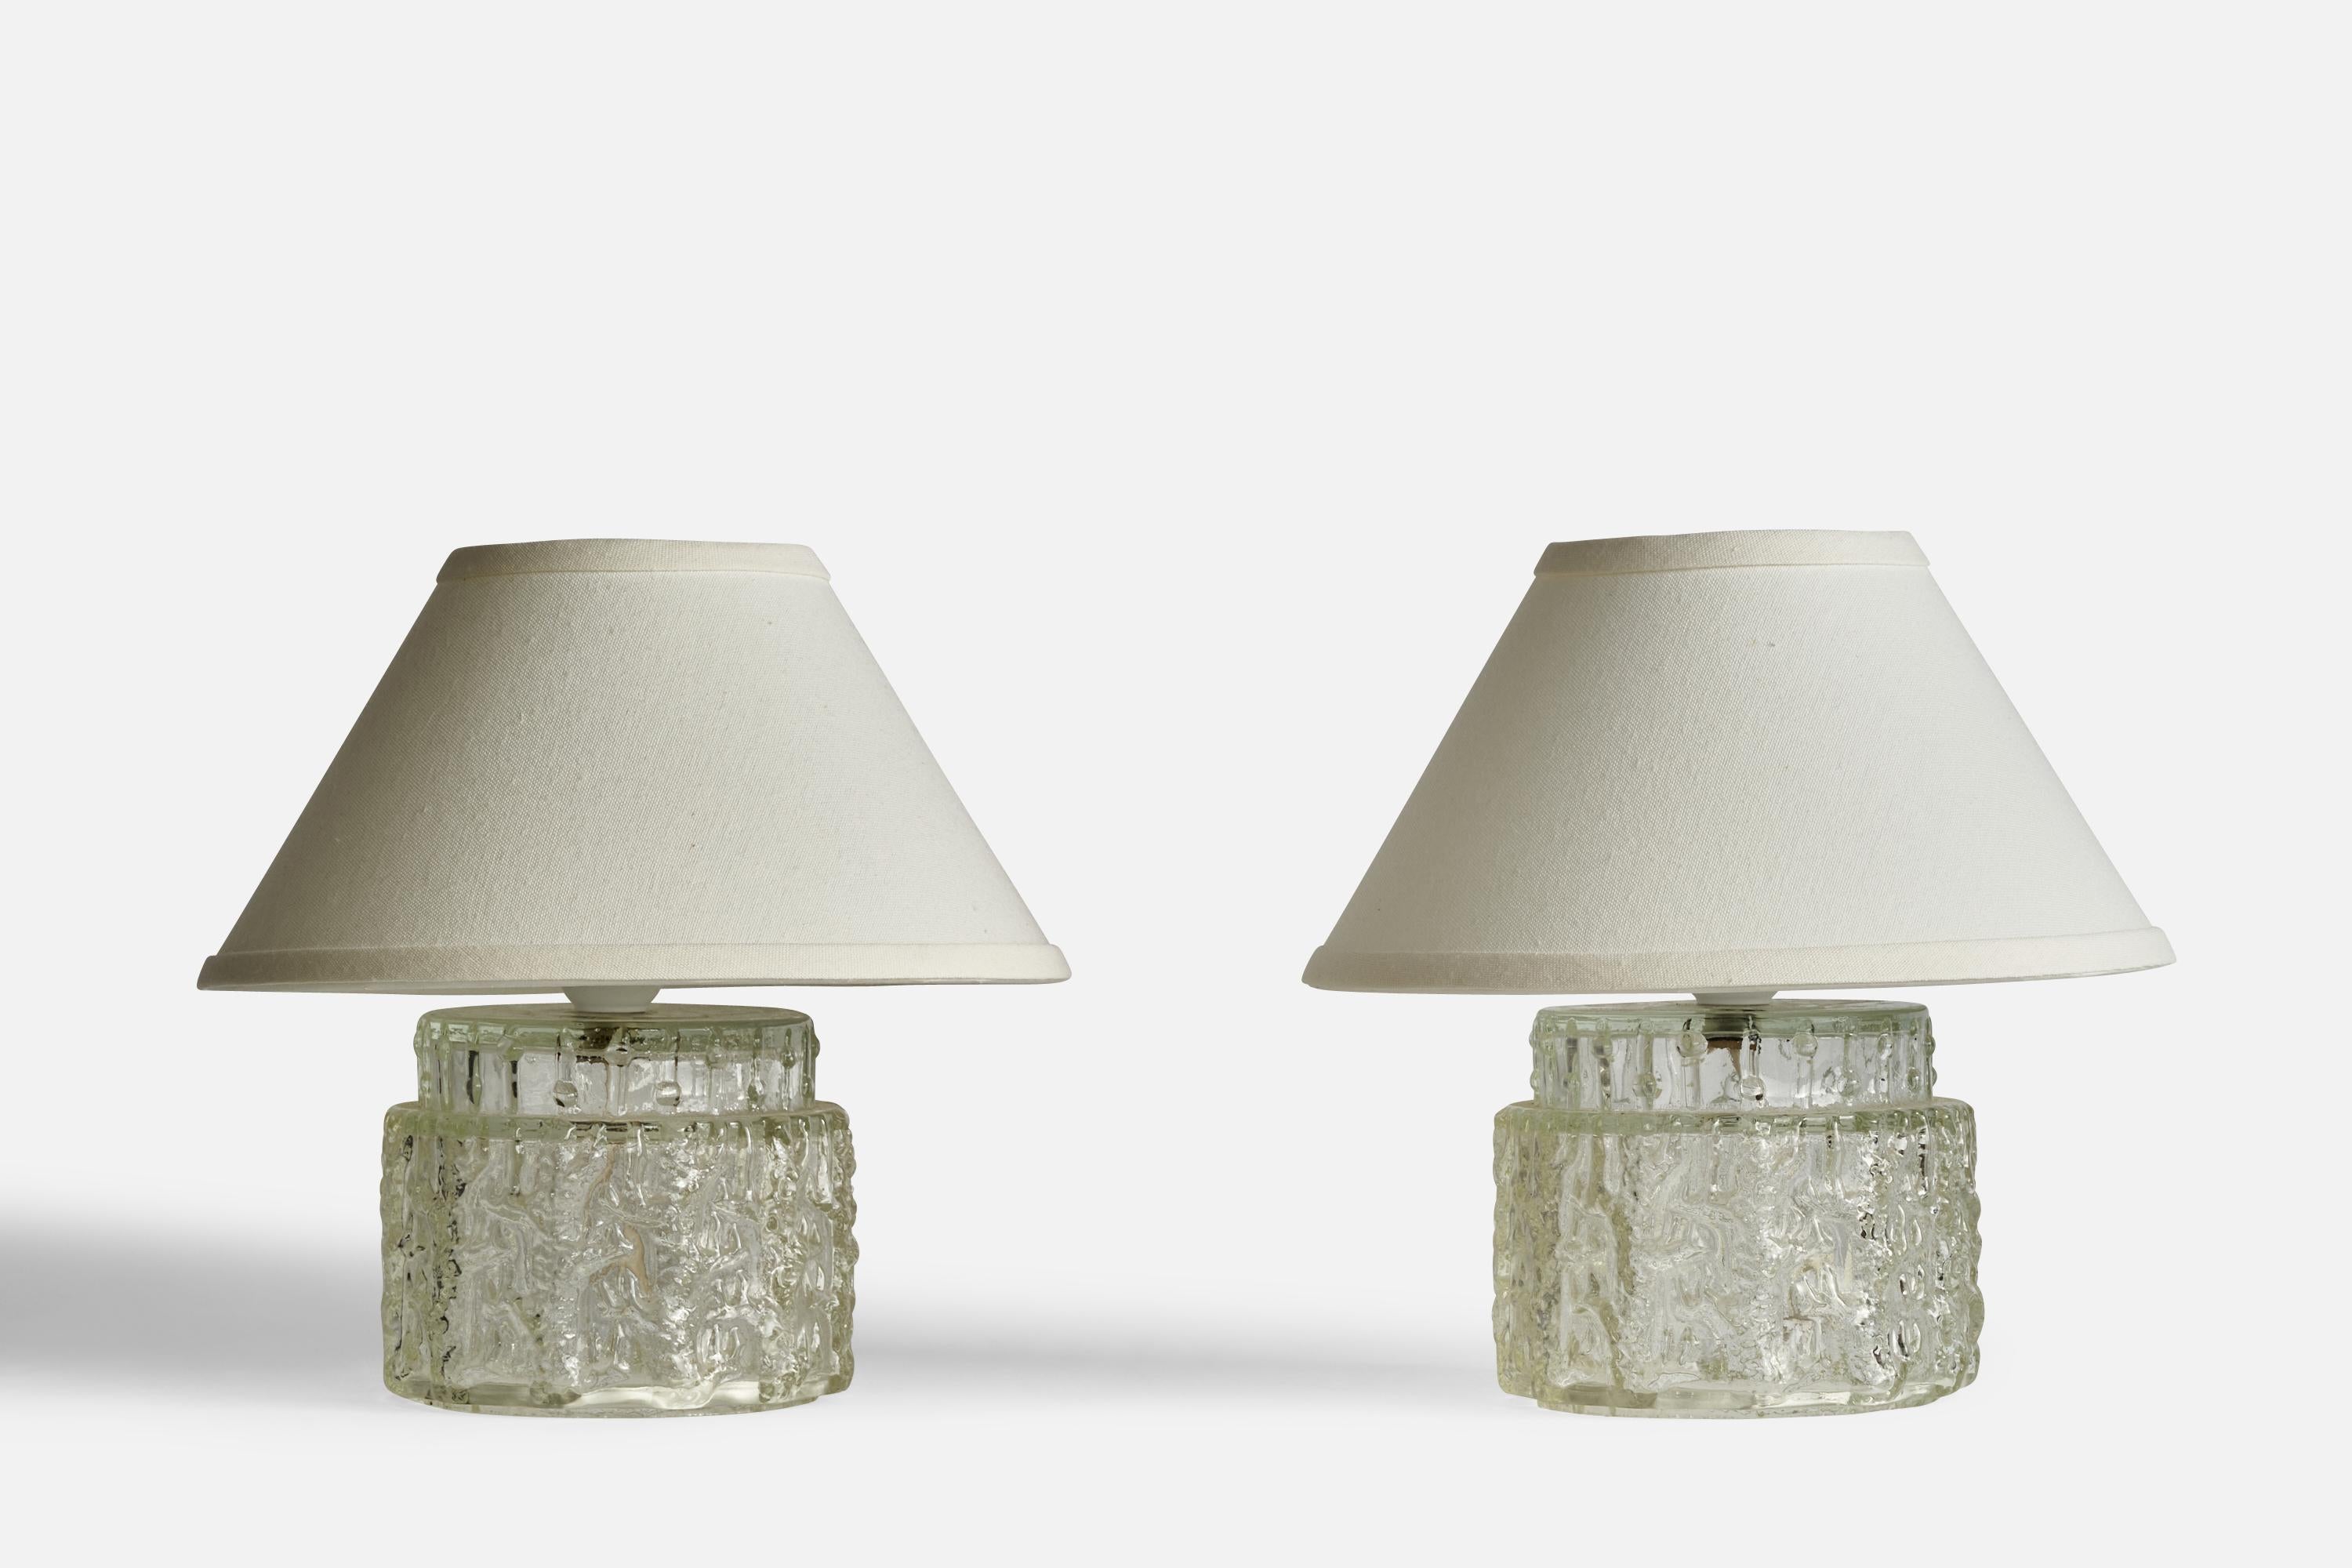 A pair of glass table lamps designed and produced in Sweden, 1960s.

Dimensions of Lamp (inches): 7” H x 5.5” Diameter
Dimensions of Shade (inches): 4.25” Top Diameter x 10.25” Bottom Diameter x 5.5”
Dimensions of Lamp with Shade (inches): 10” H x